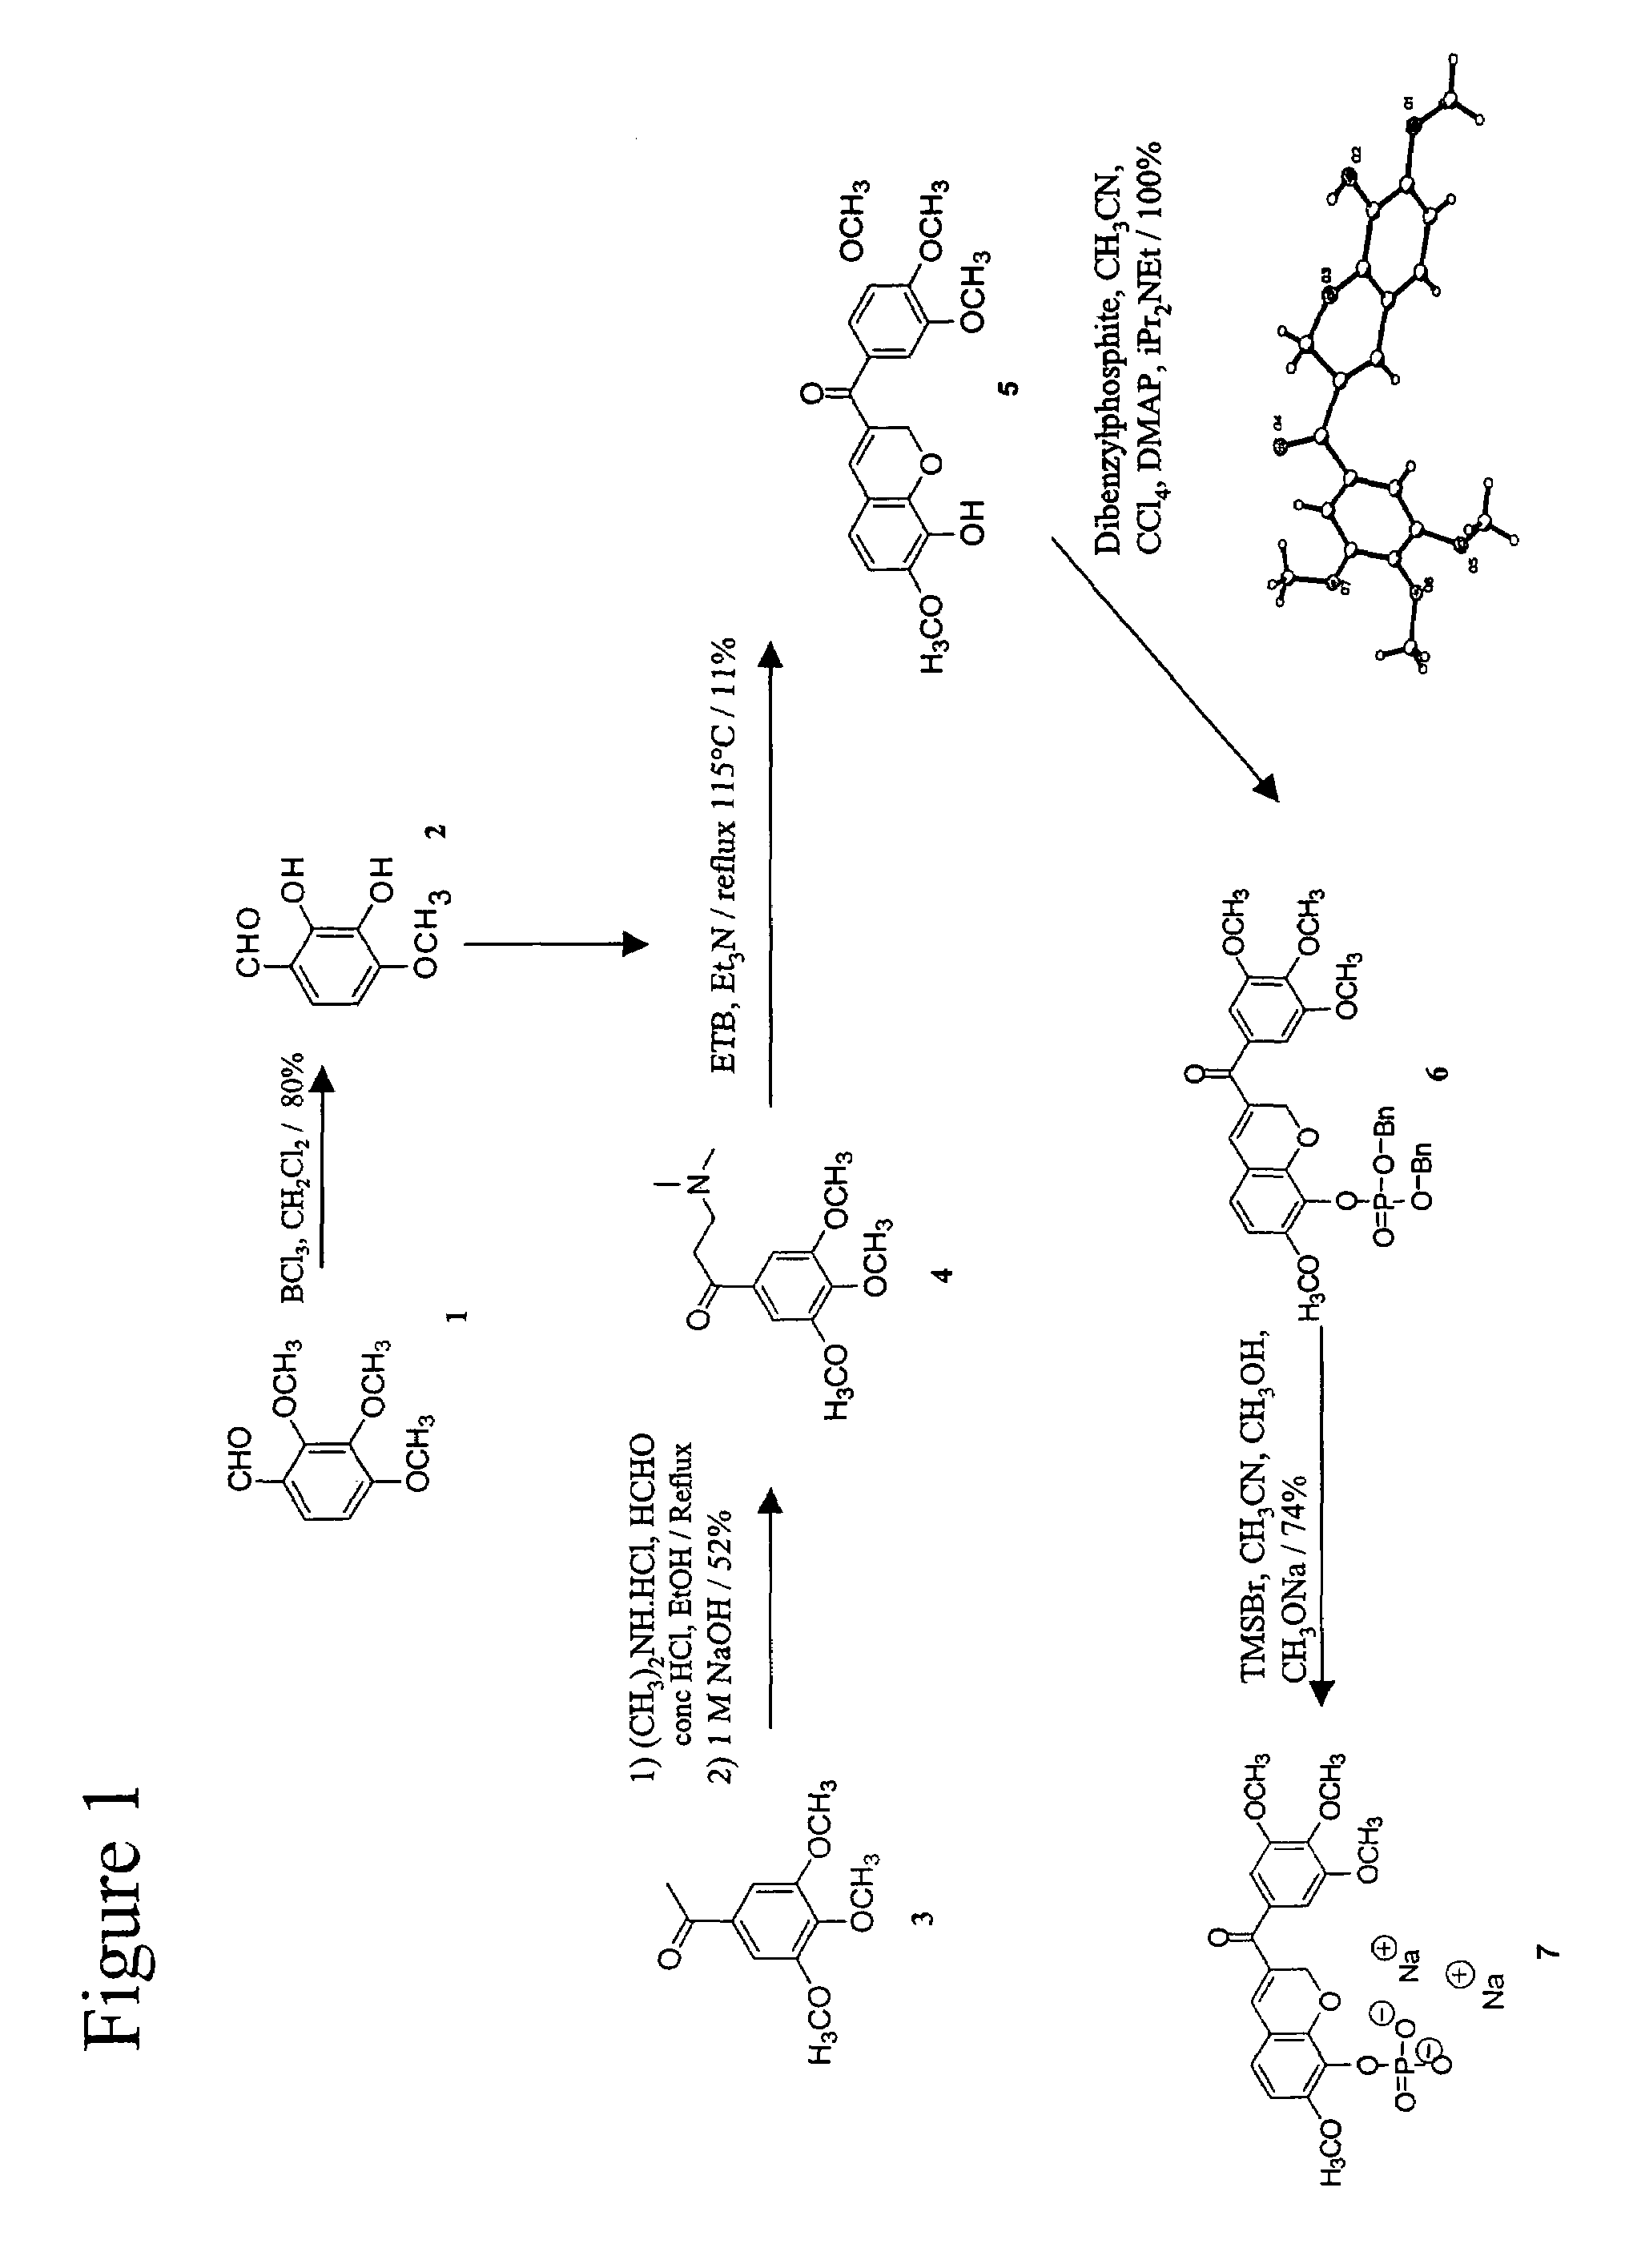 Chromene-containing compounds with anti-tubulin and vascular targeting activity